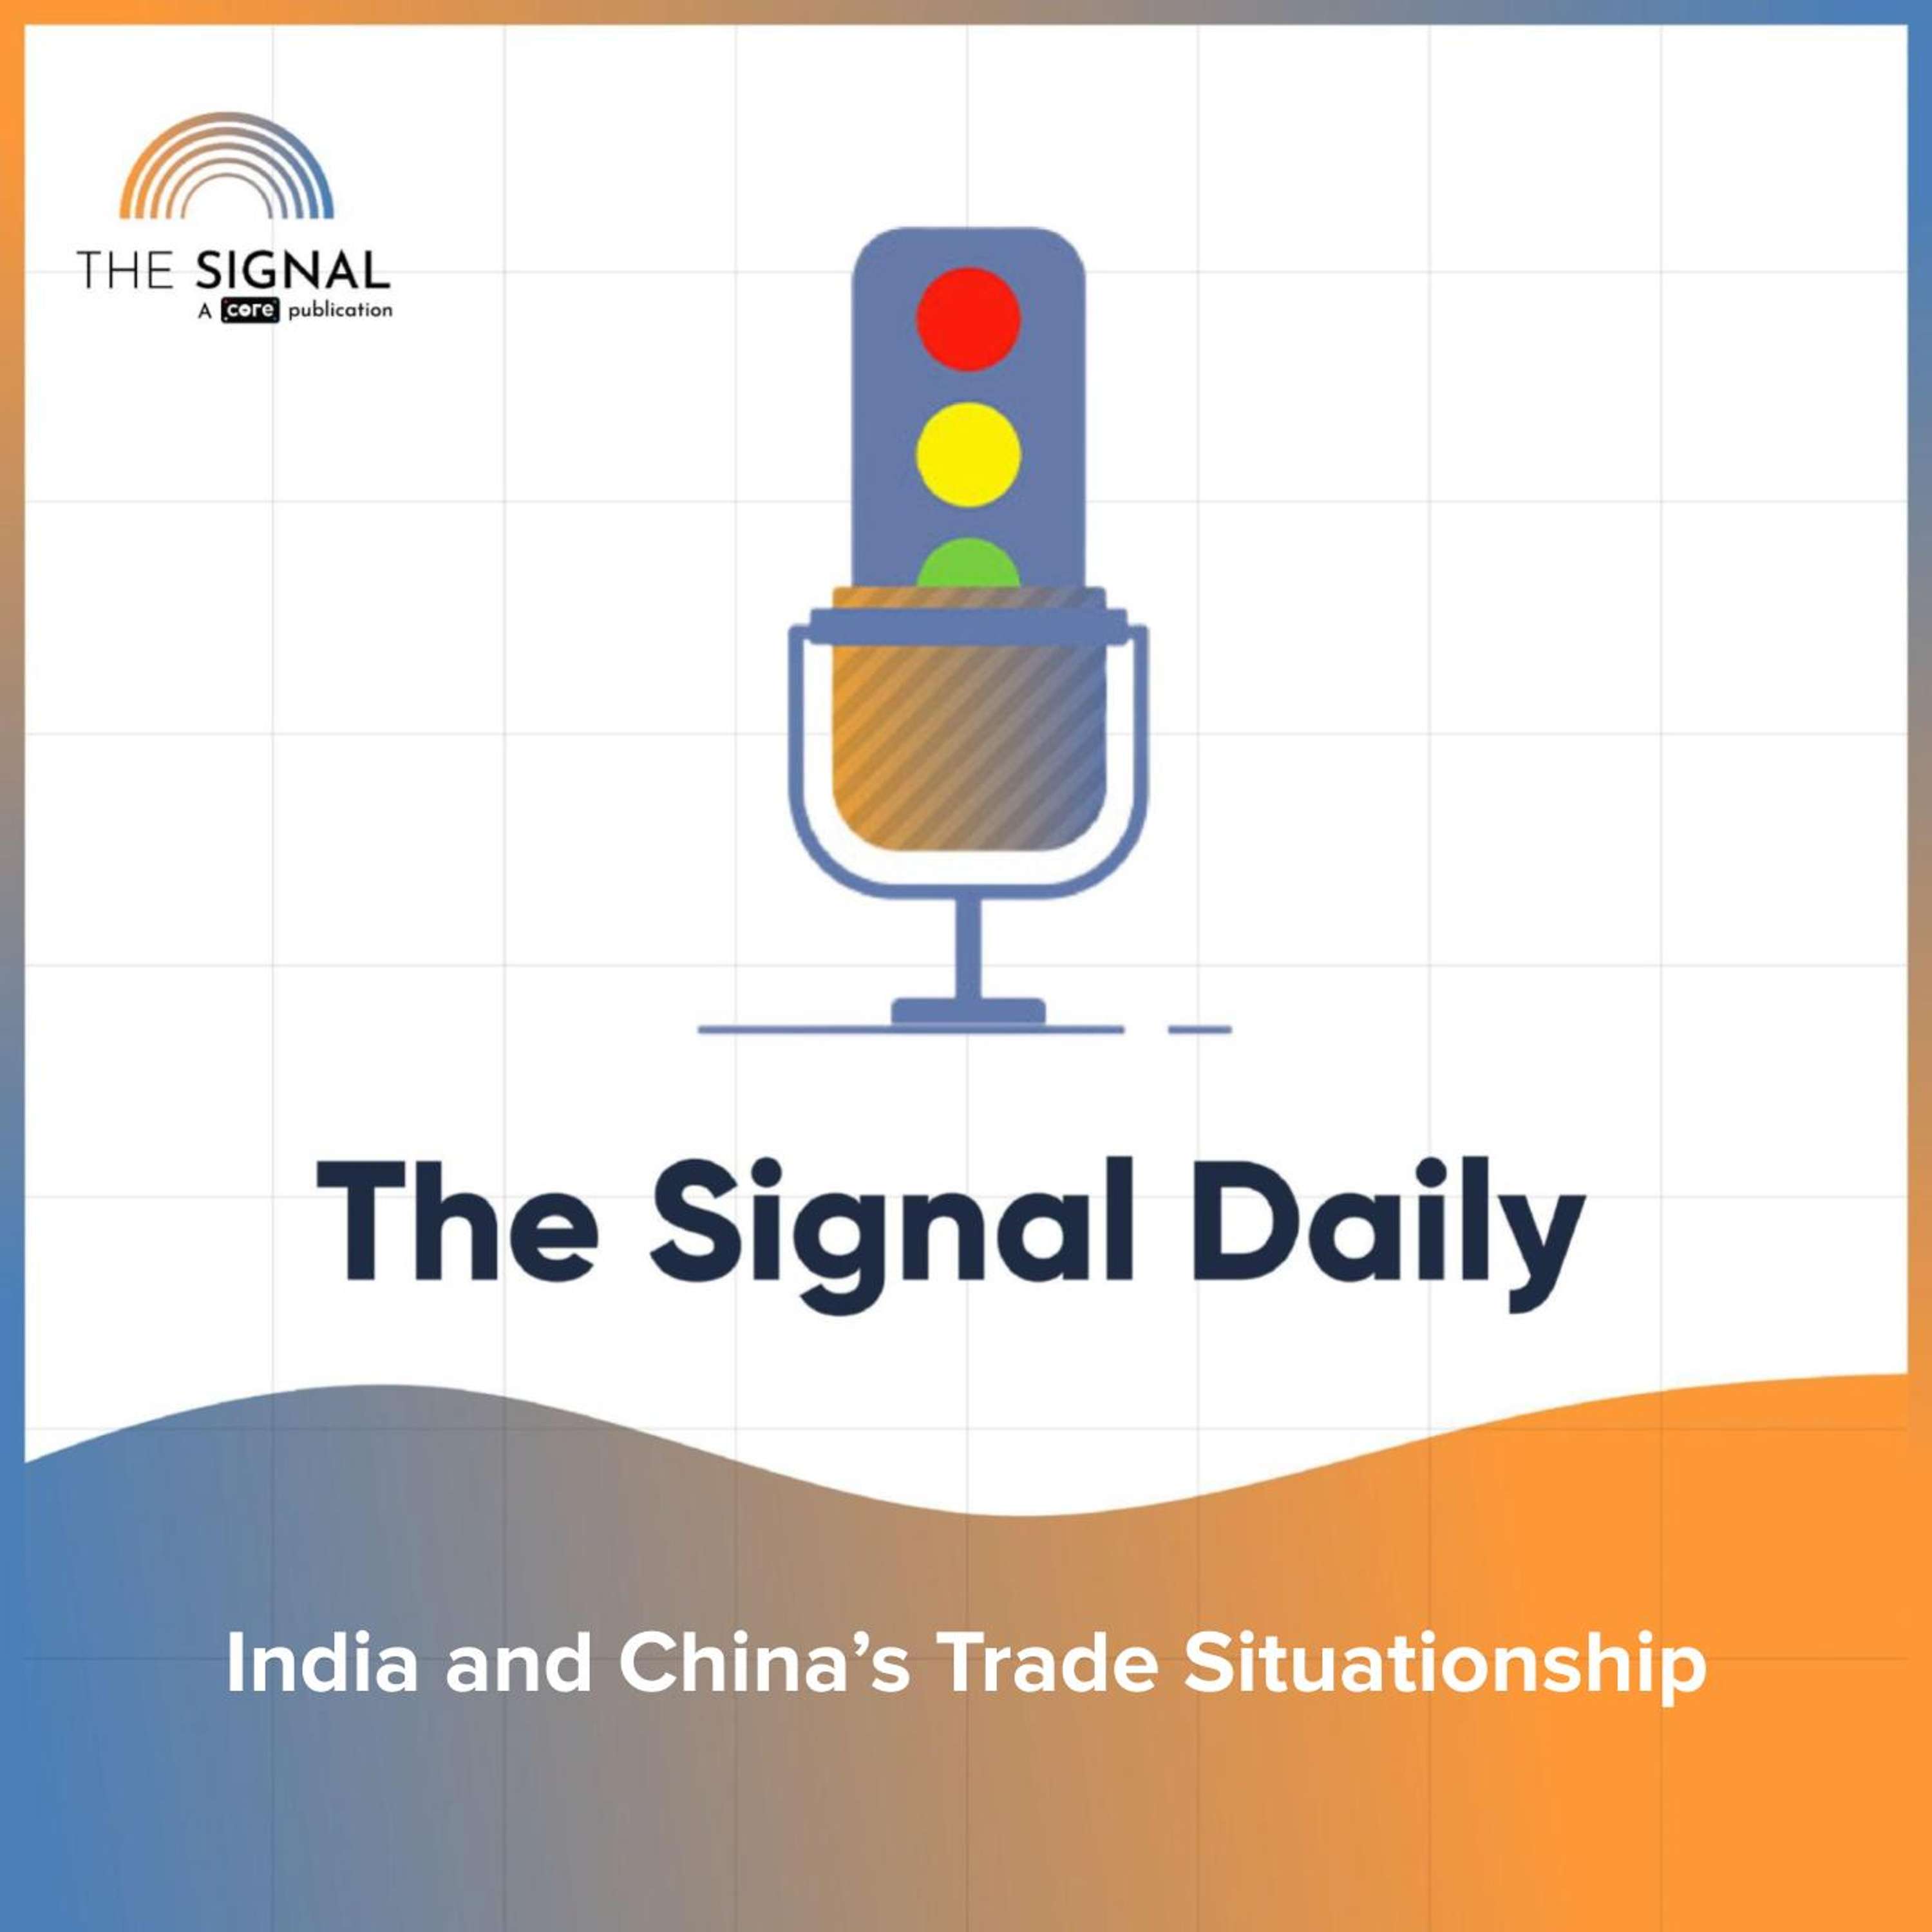 India and China’s Trade Situationship